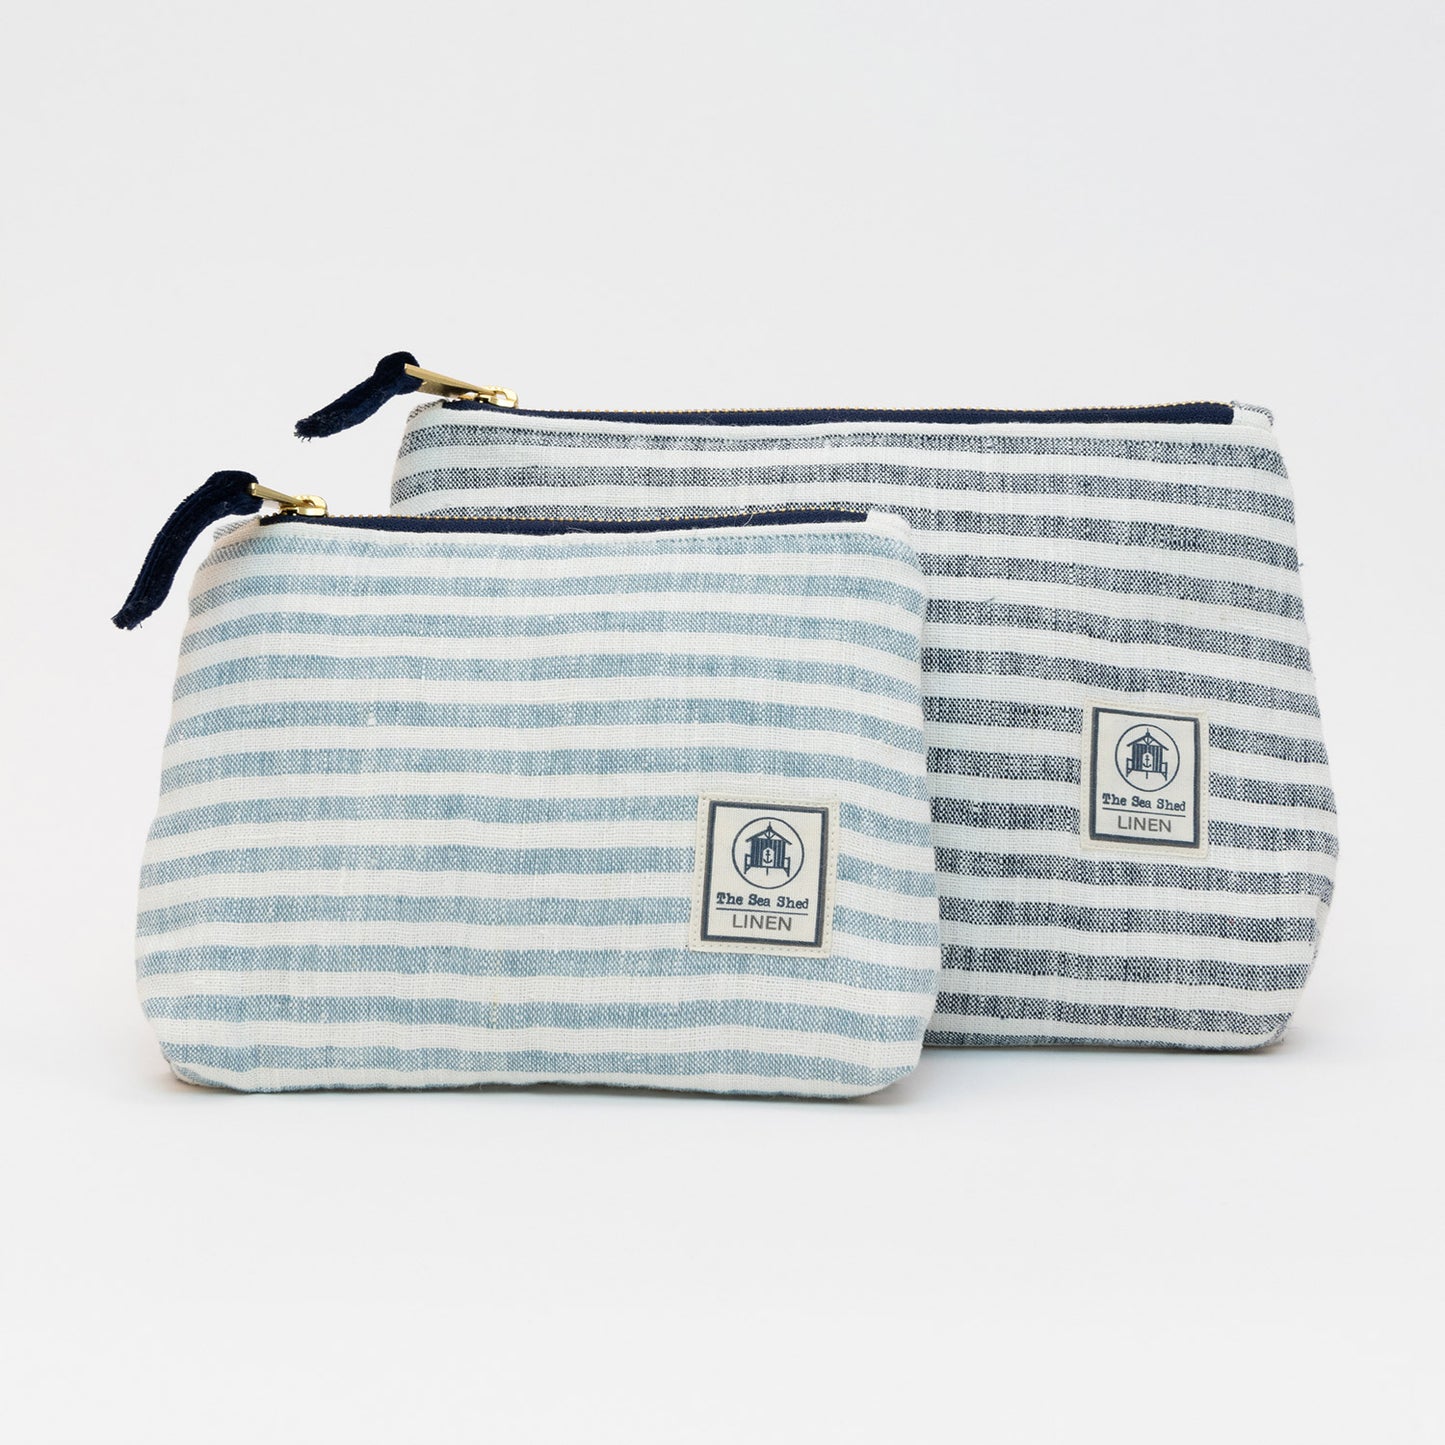 A photo of two sea blue linen makeup bags on a white background. The bags have sea blue stripes and white stripes.